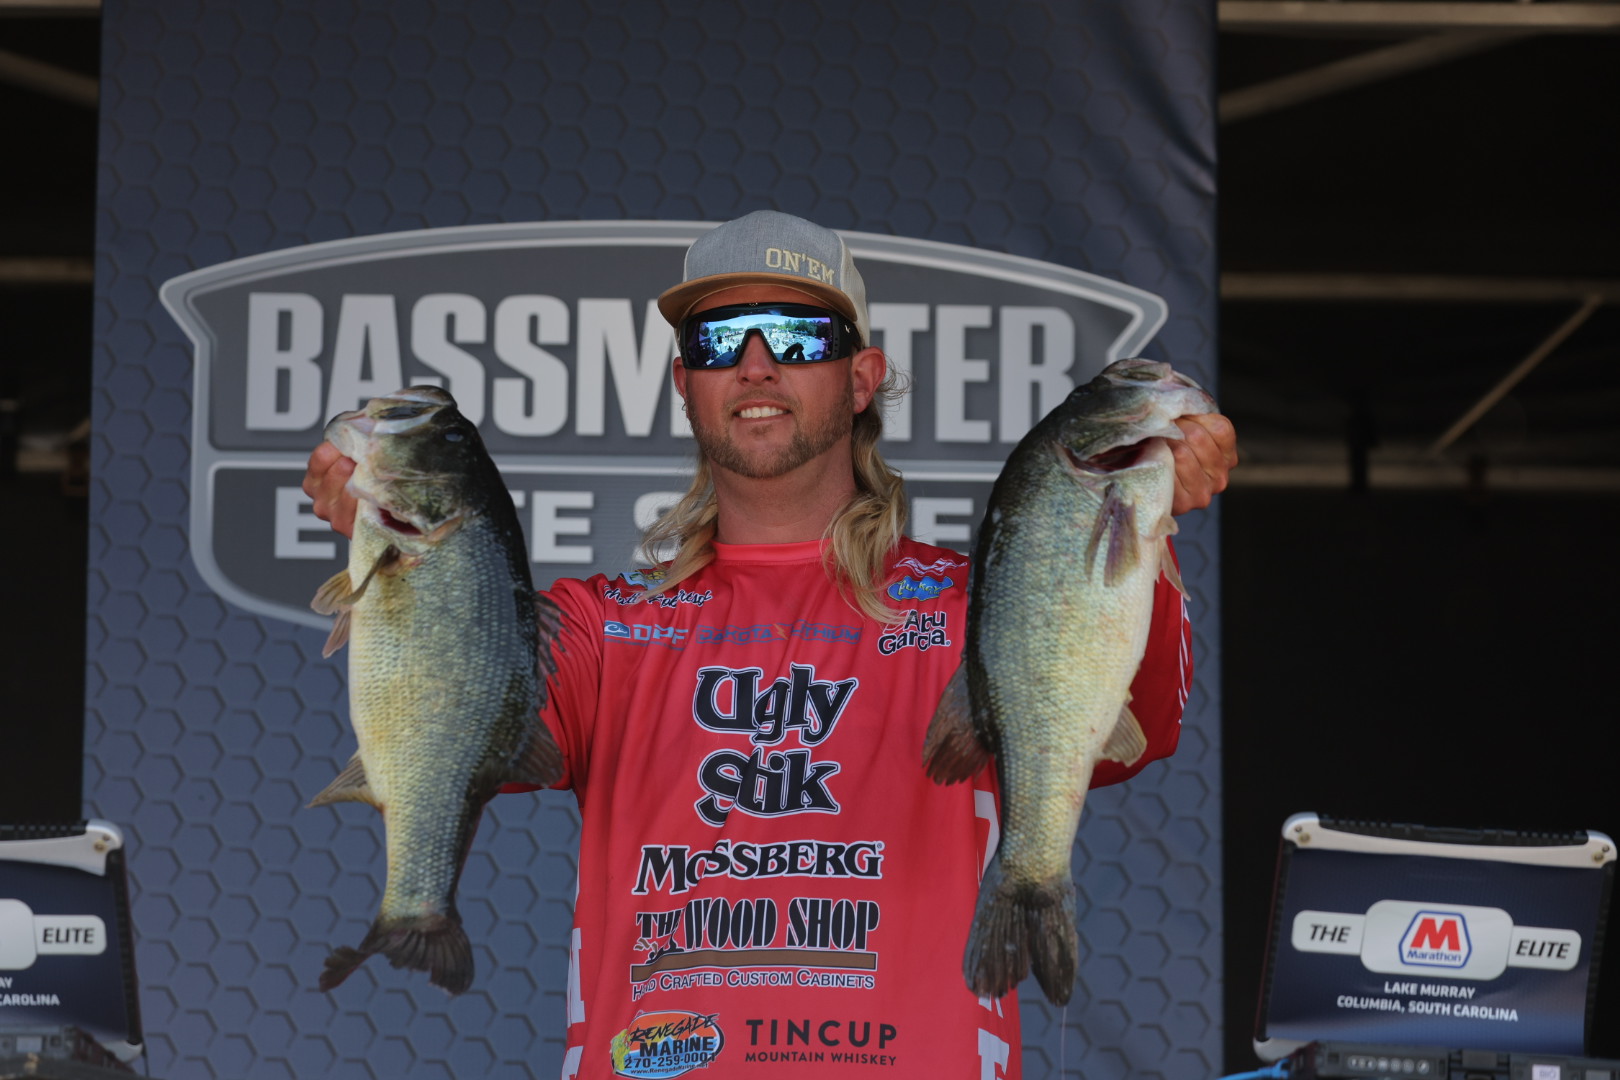 Afternoon rally lifts Robertson to Day 1 lead at Bassmaster Elite on Lake  Murray – Anglers Channel